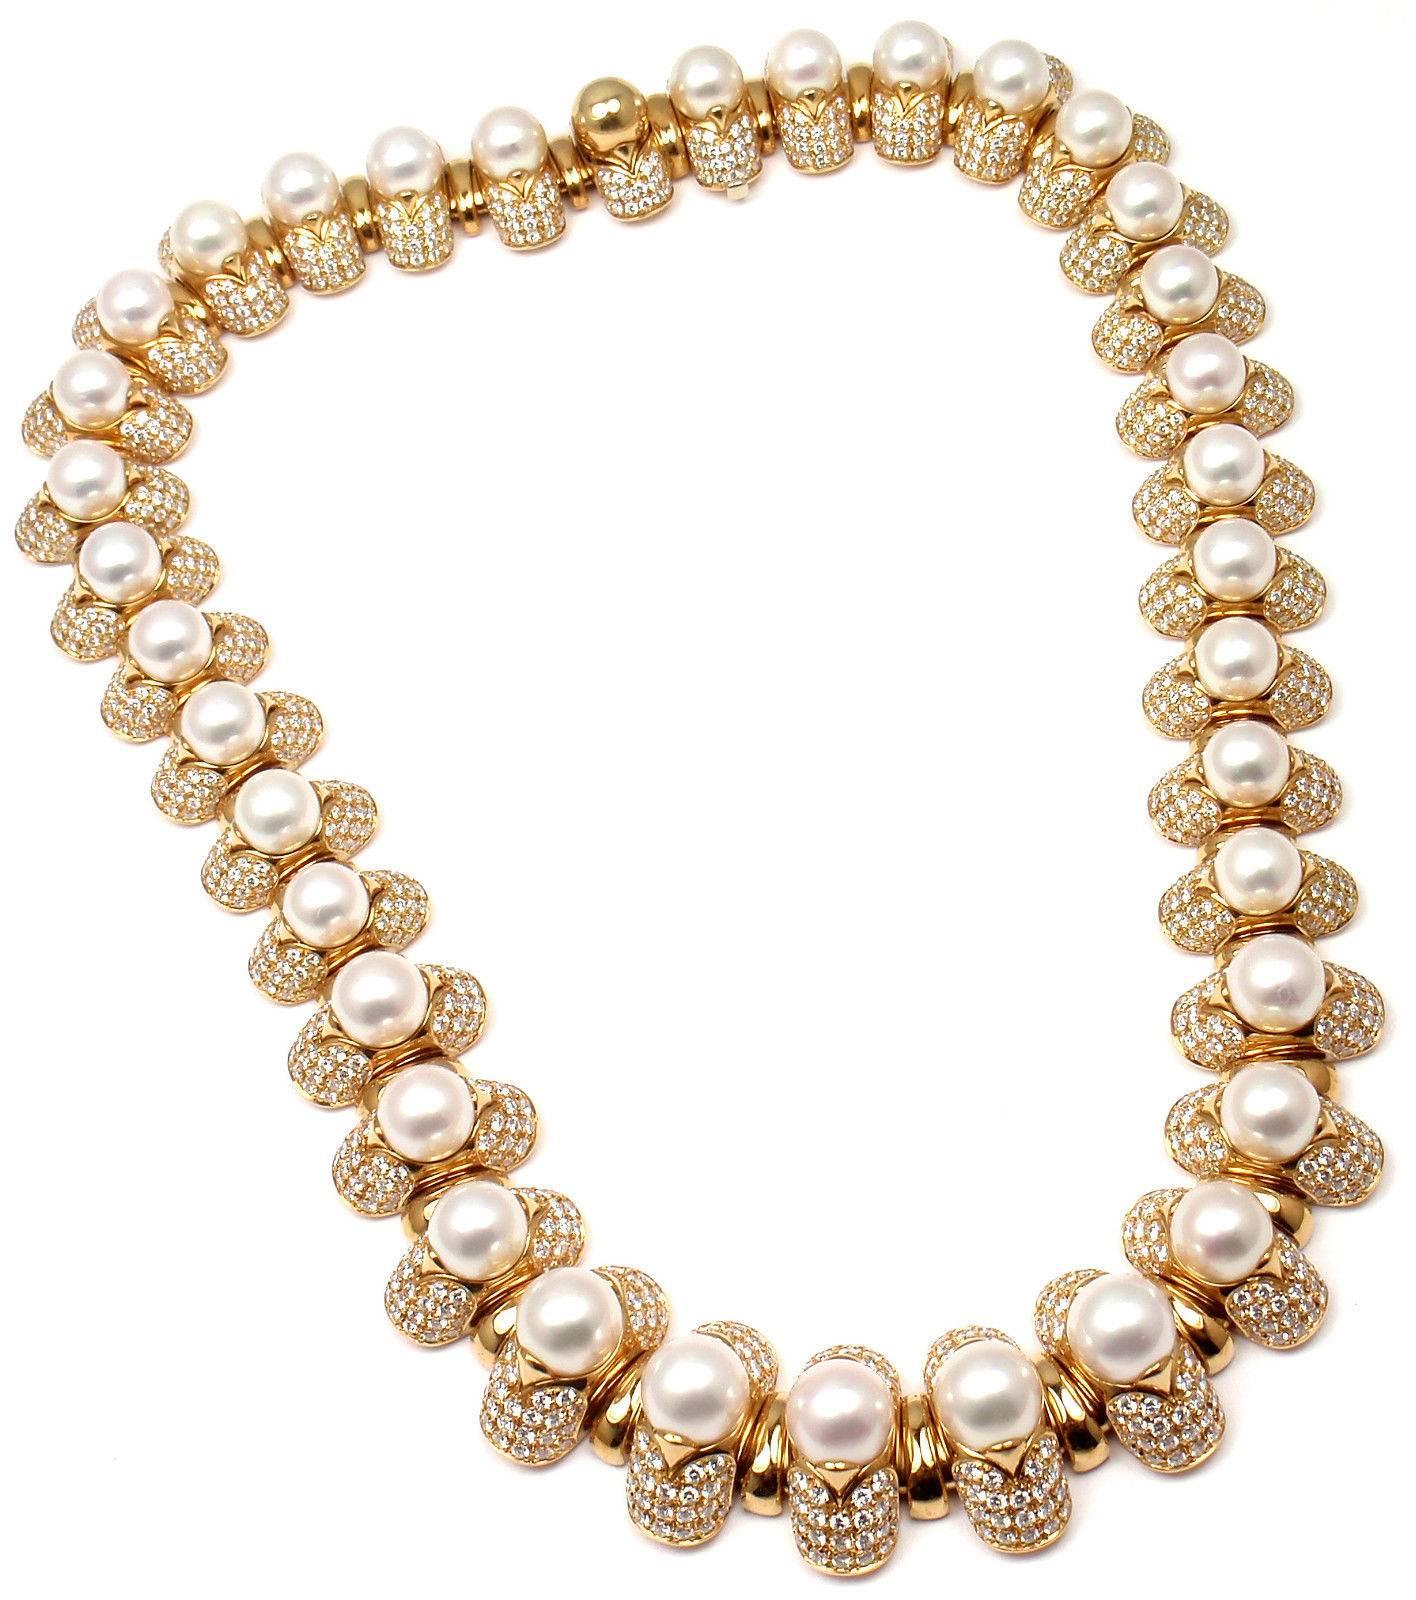 18k Yellow Gold Diamond Pearl Celtaura Necklace by Bulgari. 
With 1850 round brilliant cut diamonds VVS1 clarity, E color total weight approx. 30ct
36 cultured pearls 8mm - 7.5mm
This necklace comes with original Bulgari box.

Details: